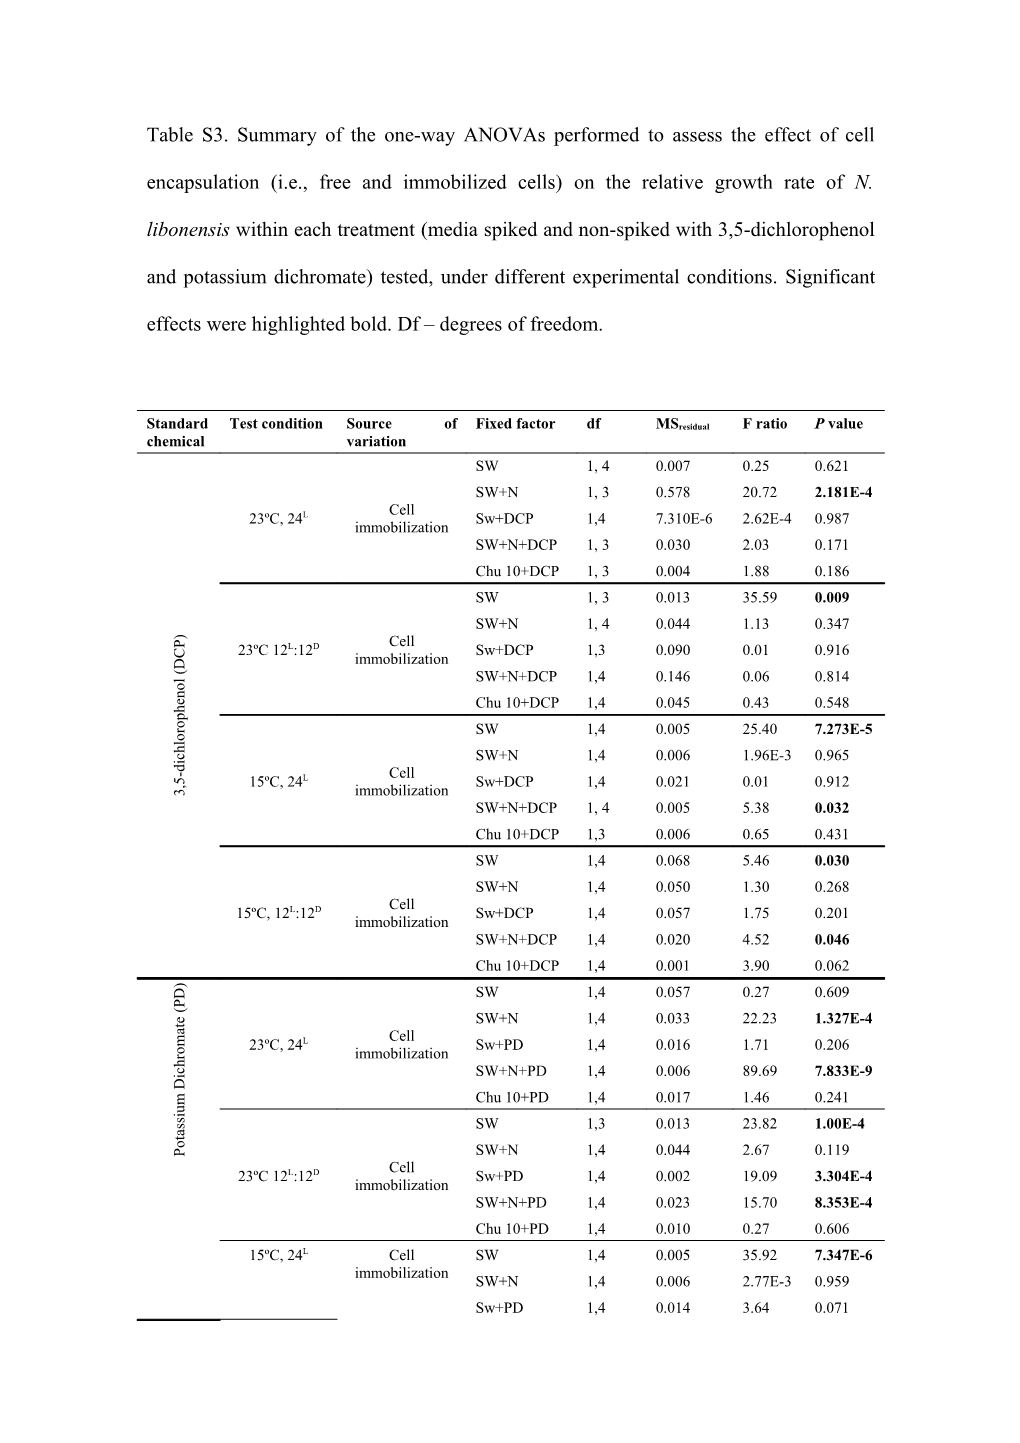 Table S3. Summary of the One-Way Anovas Performed to Assess the Effect of Cell Encapsulation